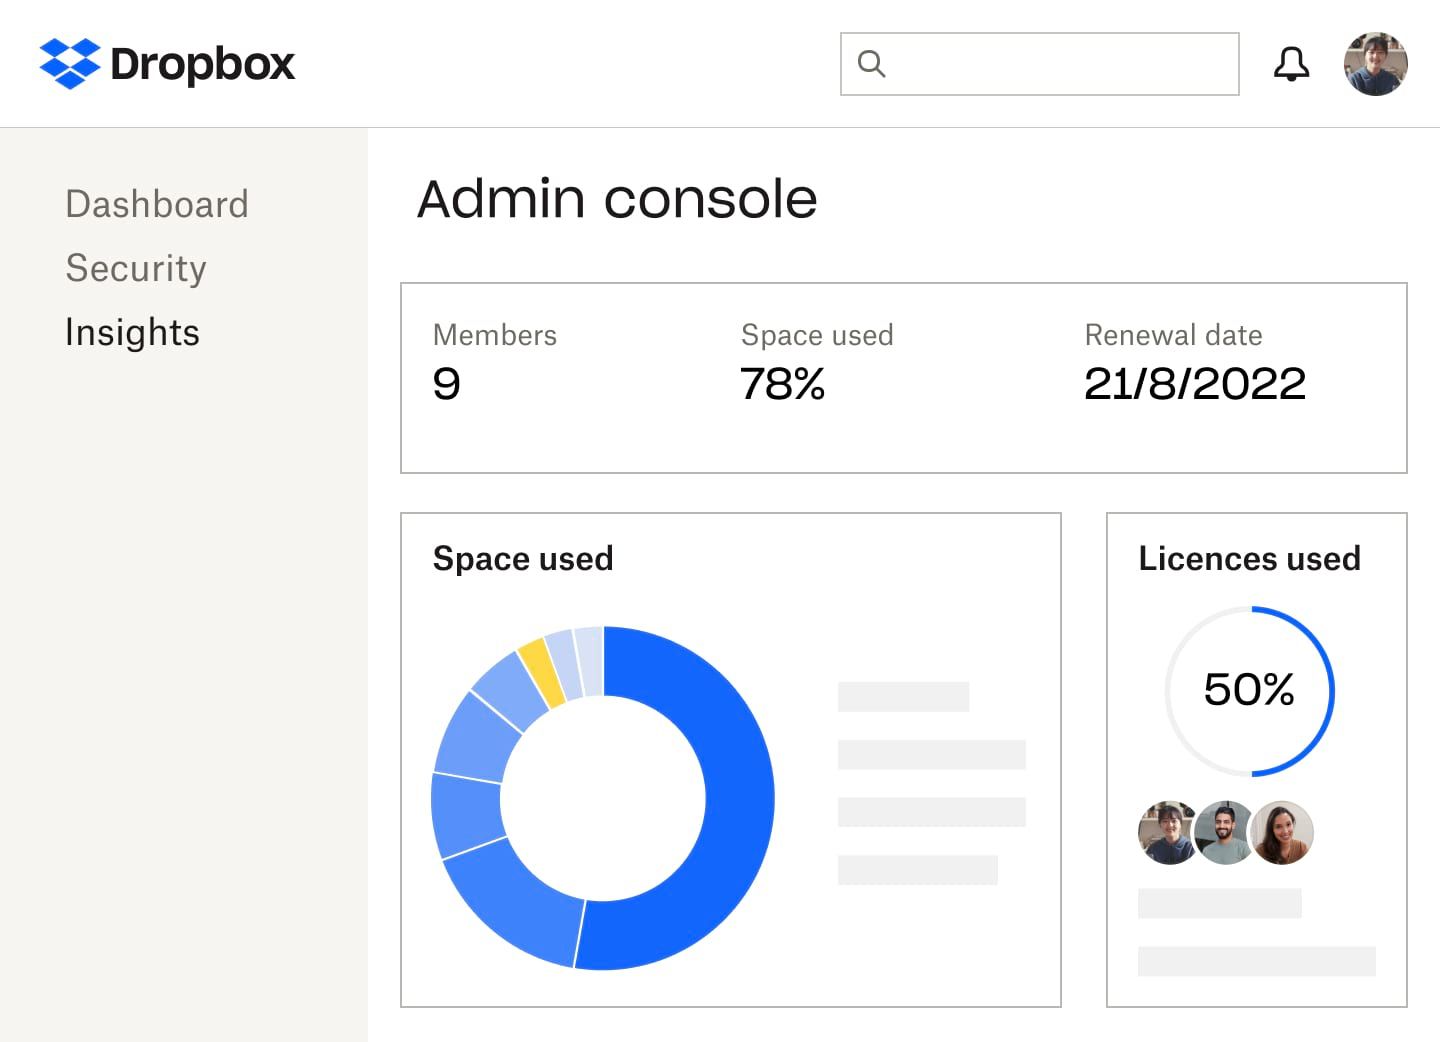 The Dropbox admin console that shows number of members, percentage of storage space and licences used, the renewal date of the subscription and a blue and yellow pie chart of the space used